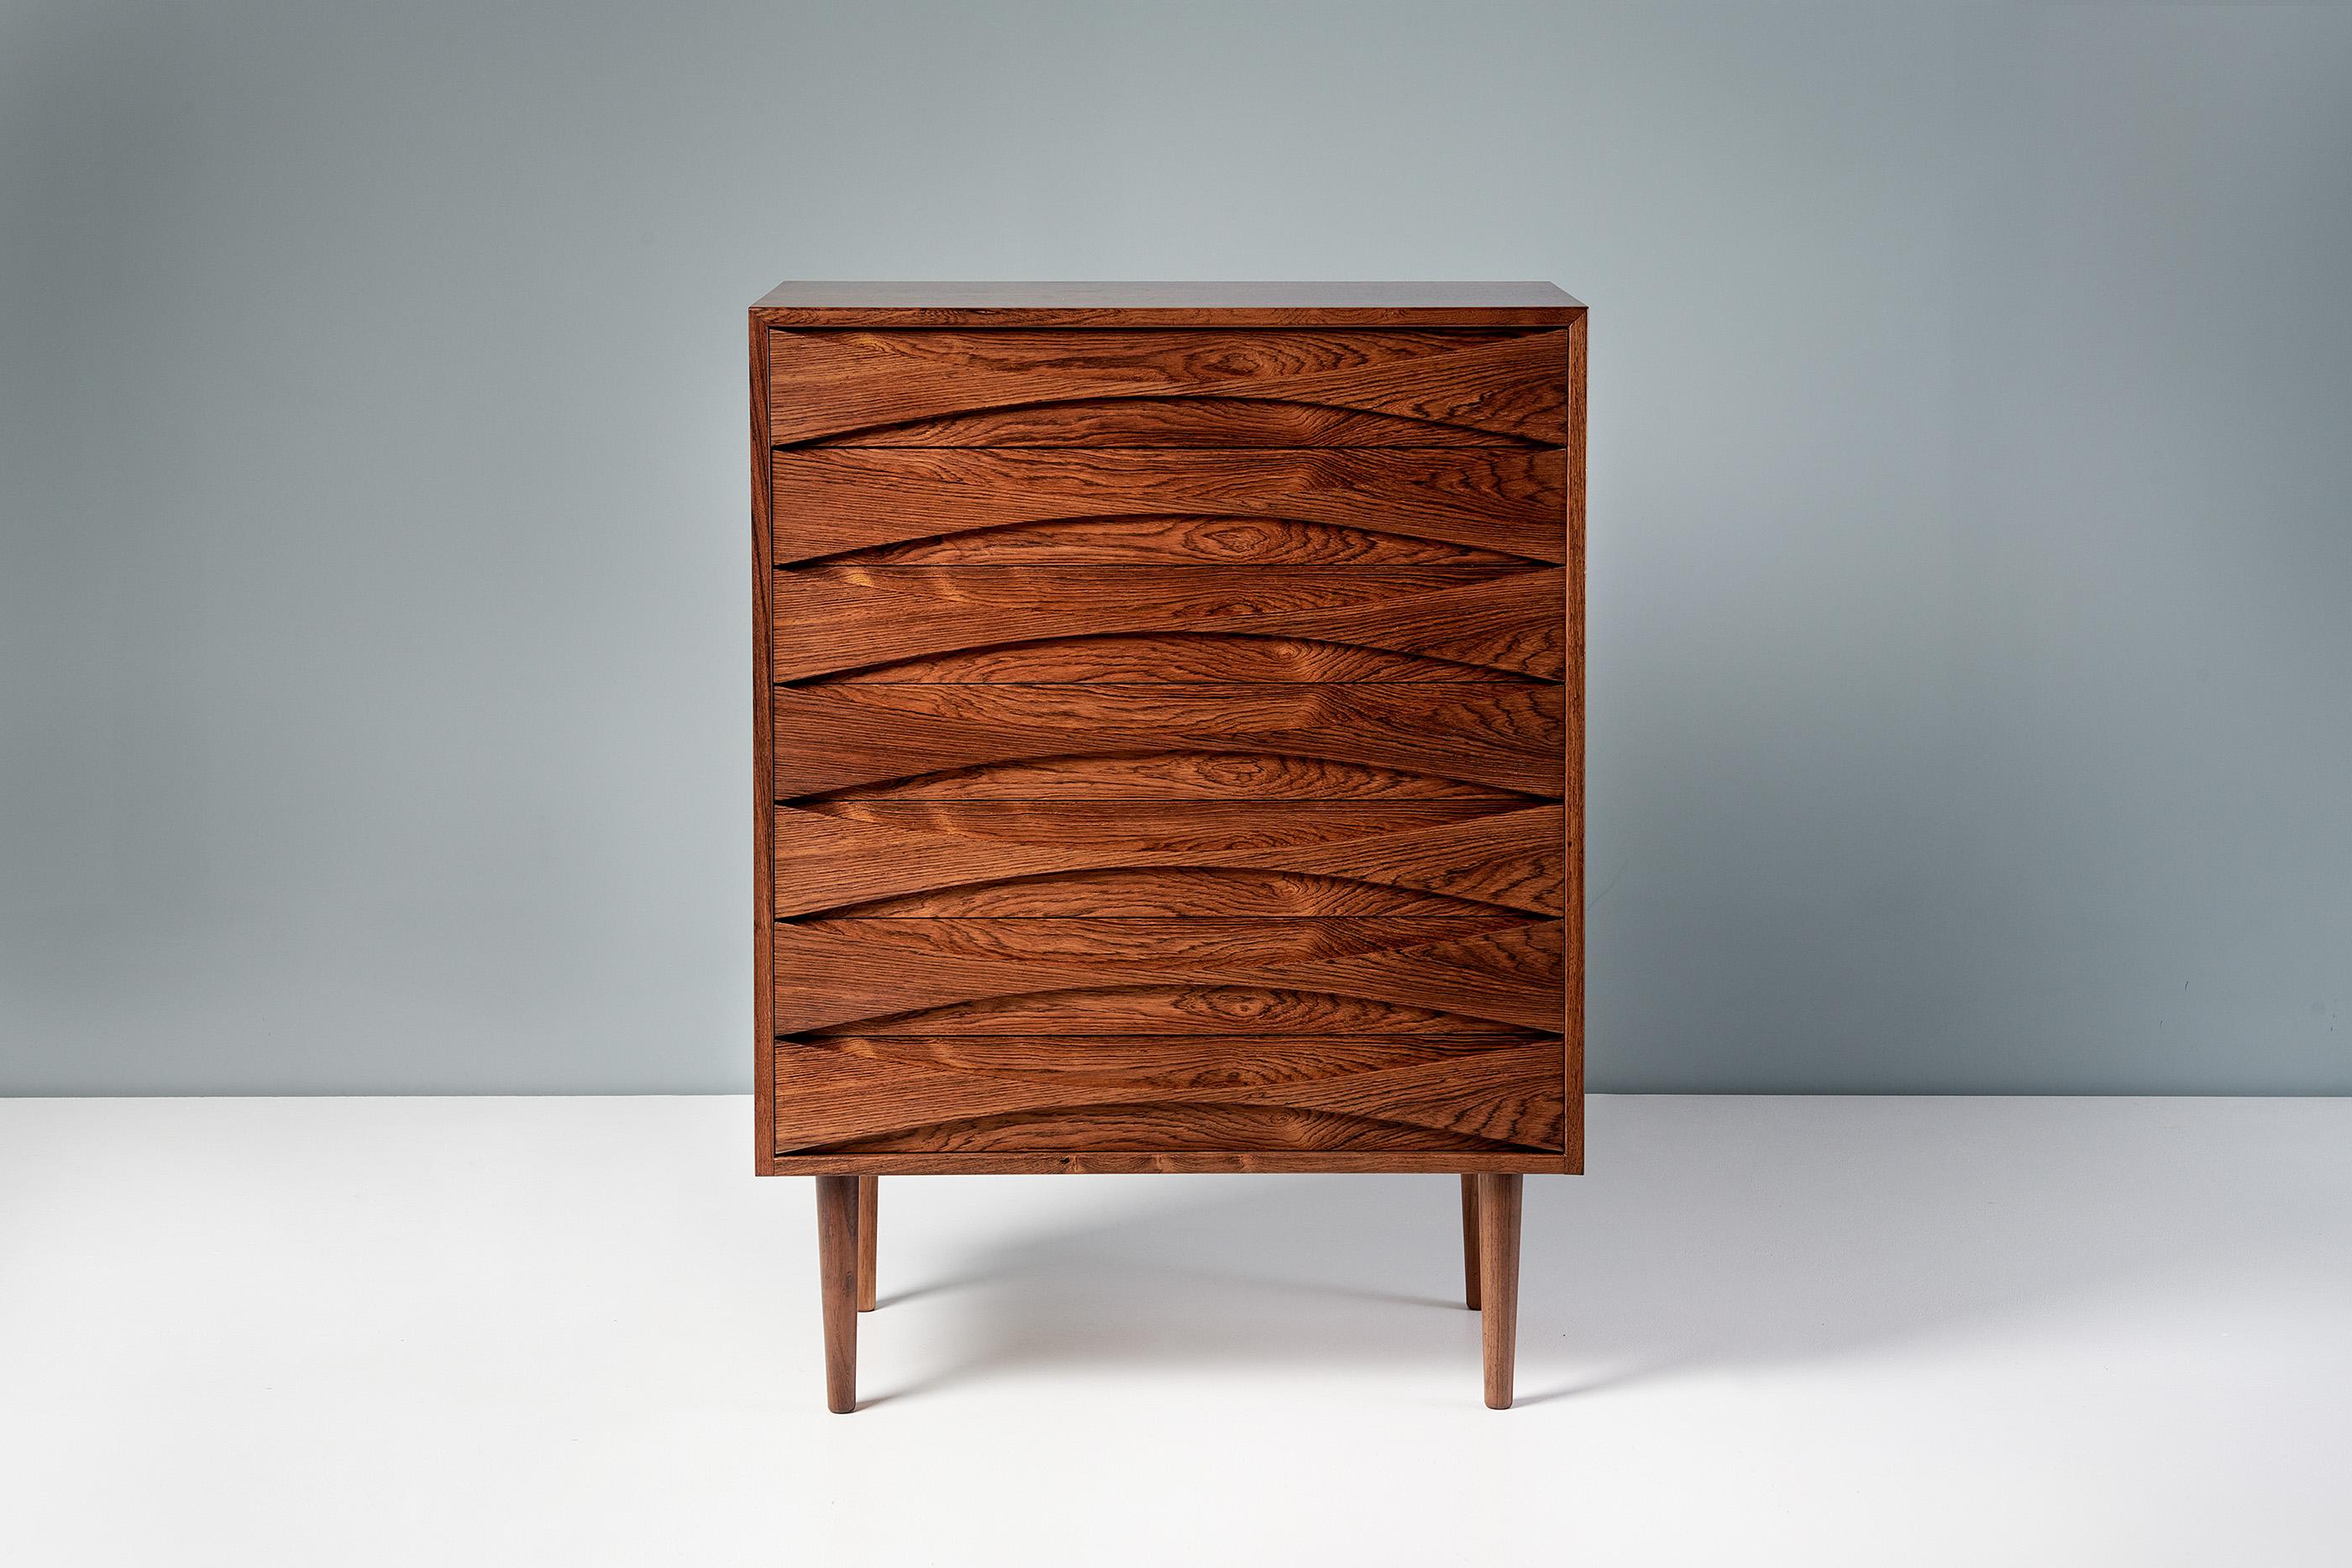 Rarely seen chest of drawers from Danish designer Niels Clausen, produced by his own company NC Mobler, c1960s. 

This chest features turned and tapered legs in solid rosewood. The chest frame is made of oak with highly figured rosewood veneer. The